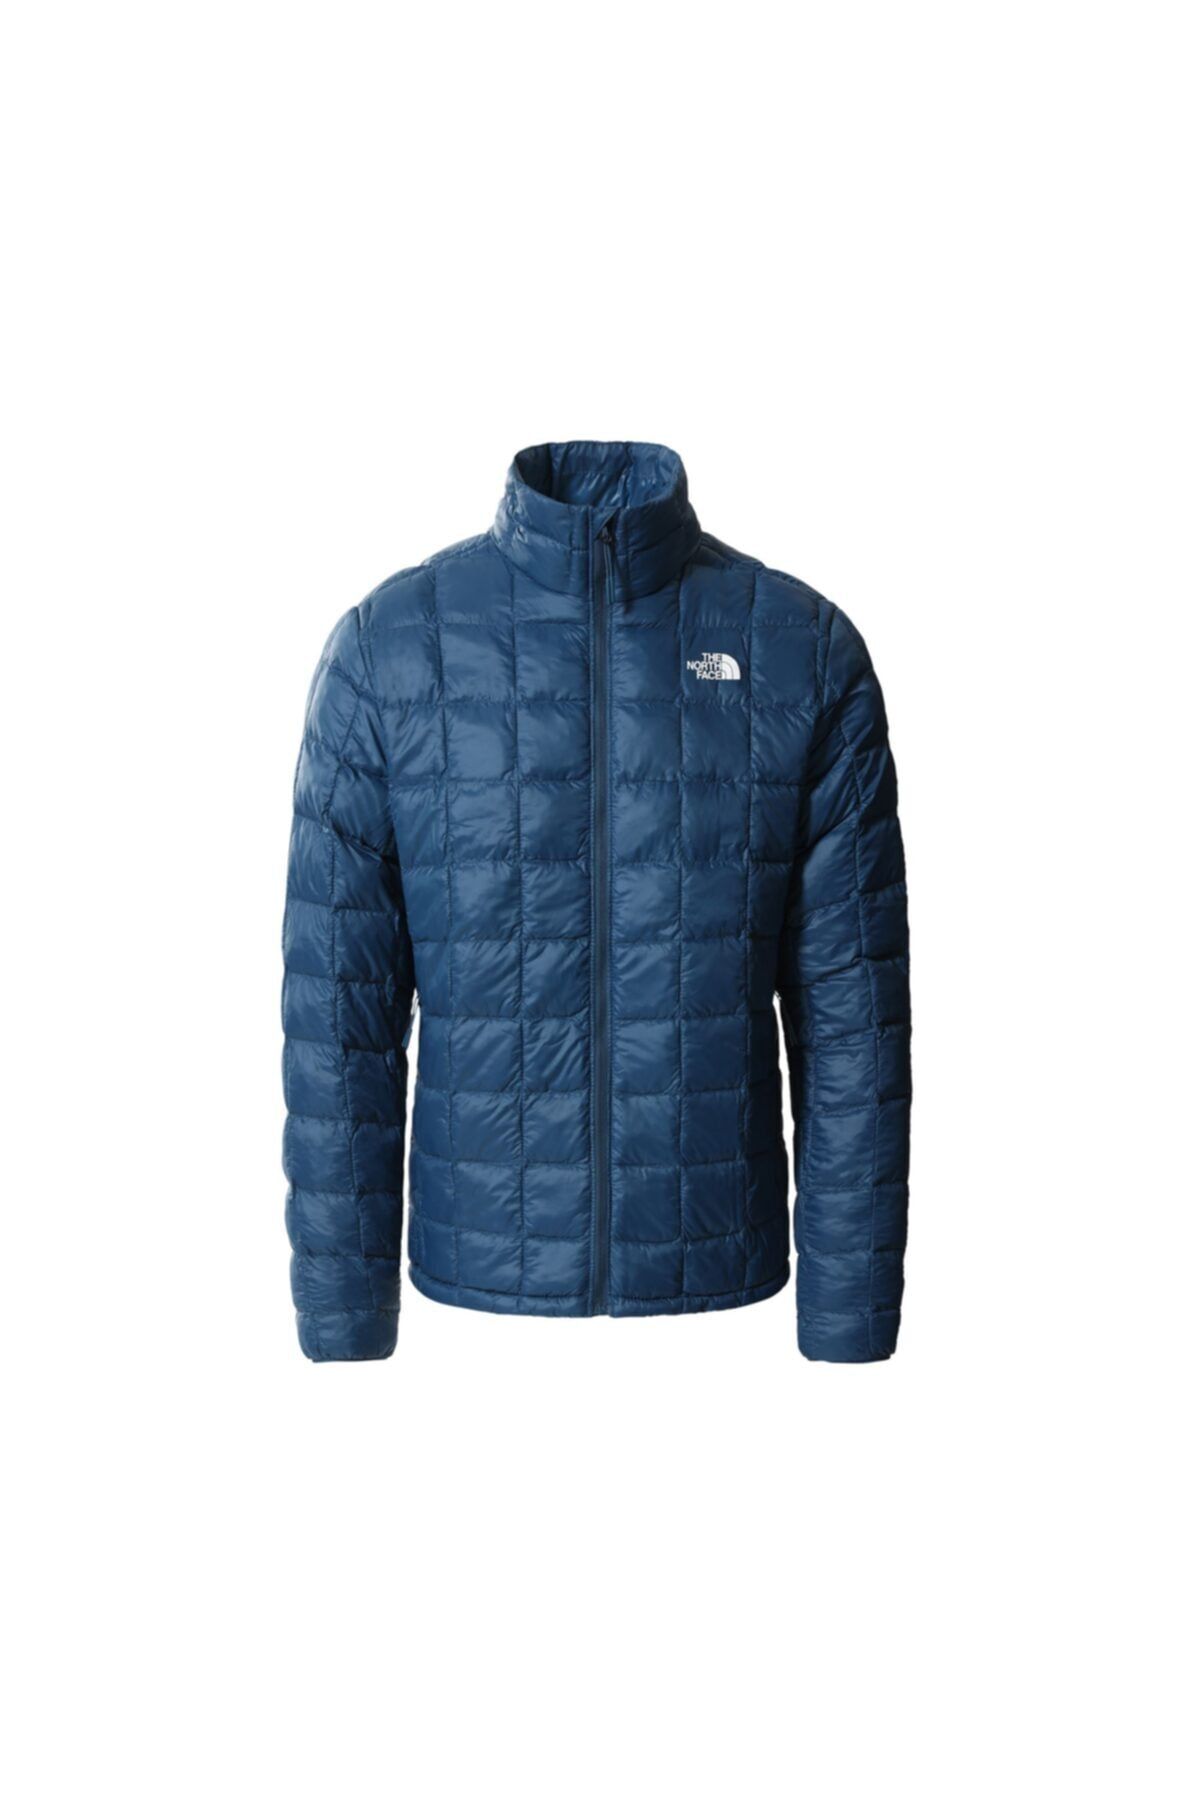 The North Face M Thermoball Eco Jacket 2.0 Erkek Outdoor Montu Nf0a5gll25h1 Mavi